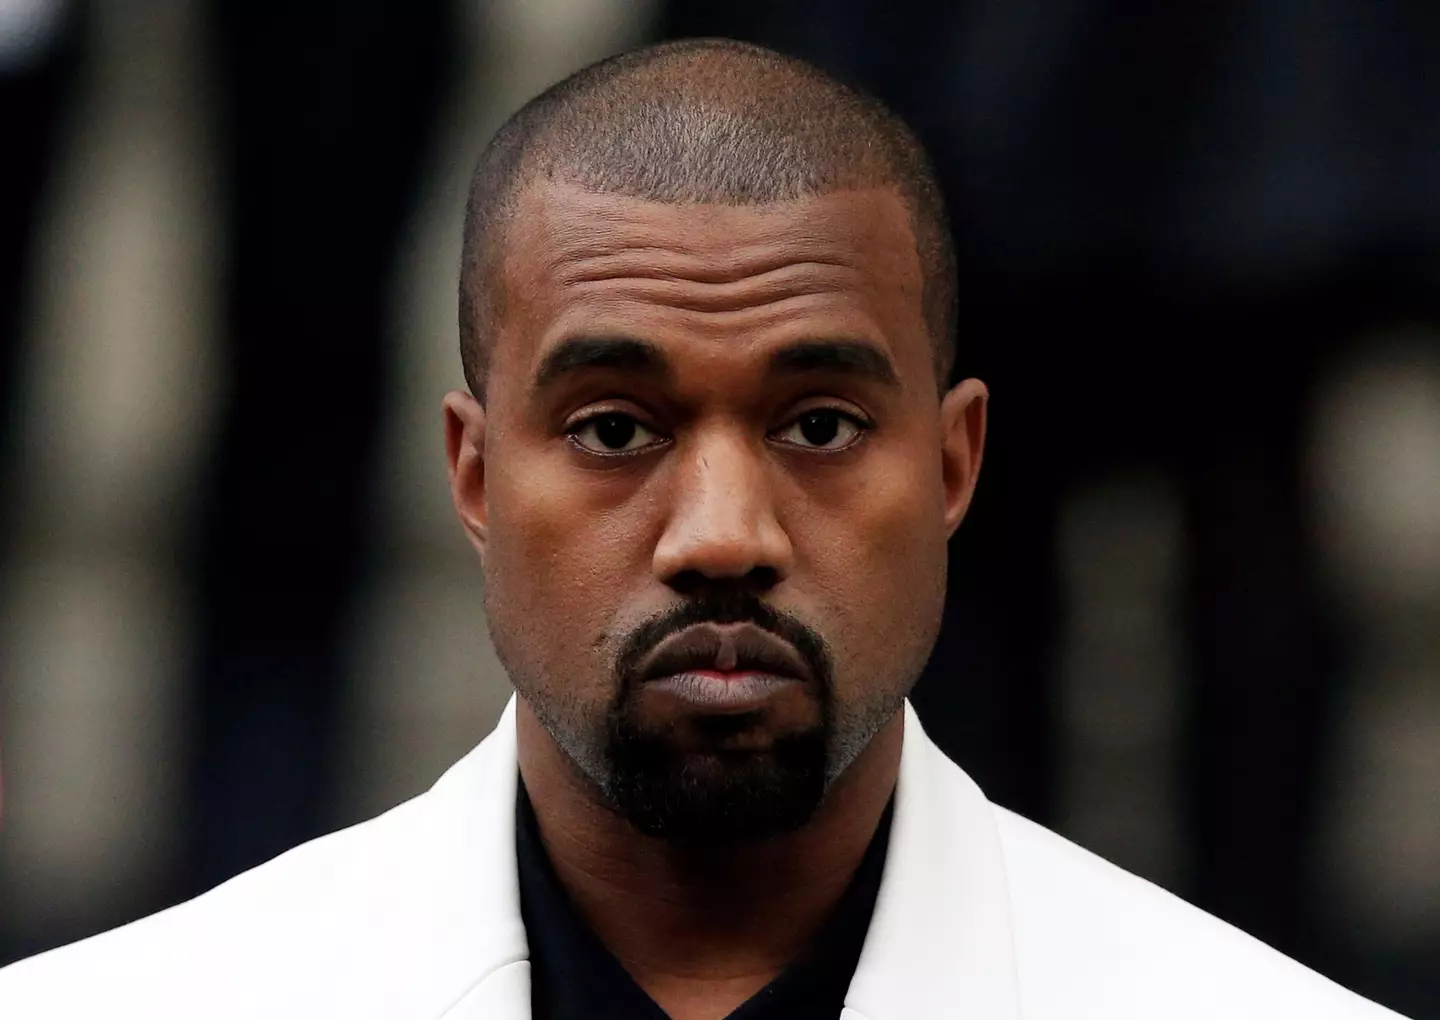 Kanye West is terminating his contract with Gap.